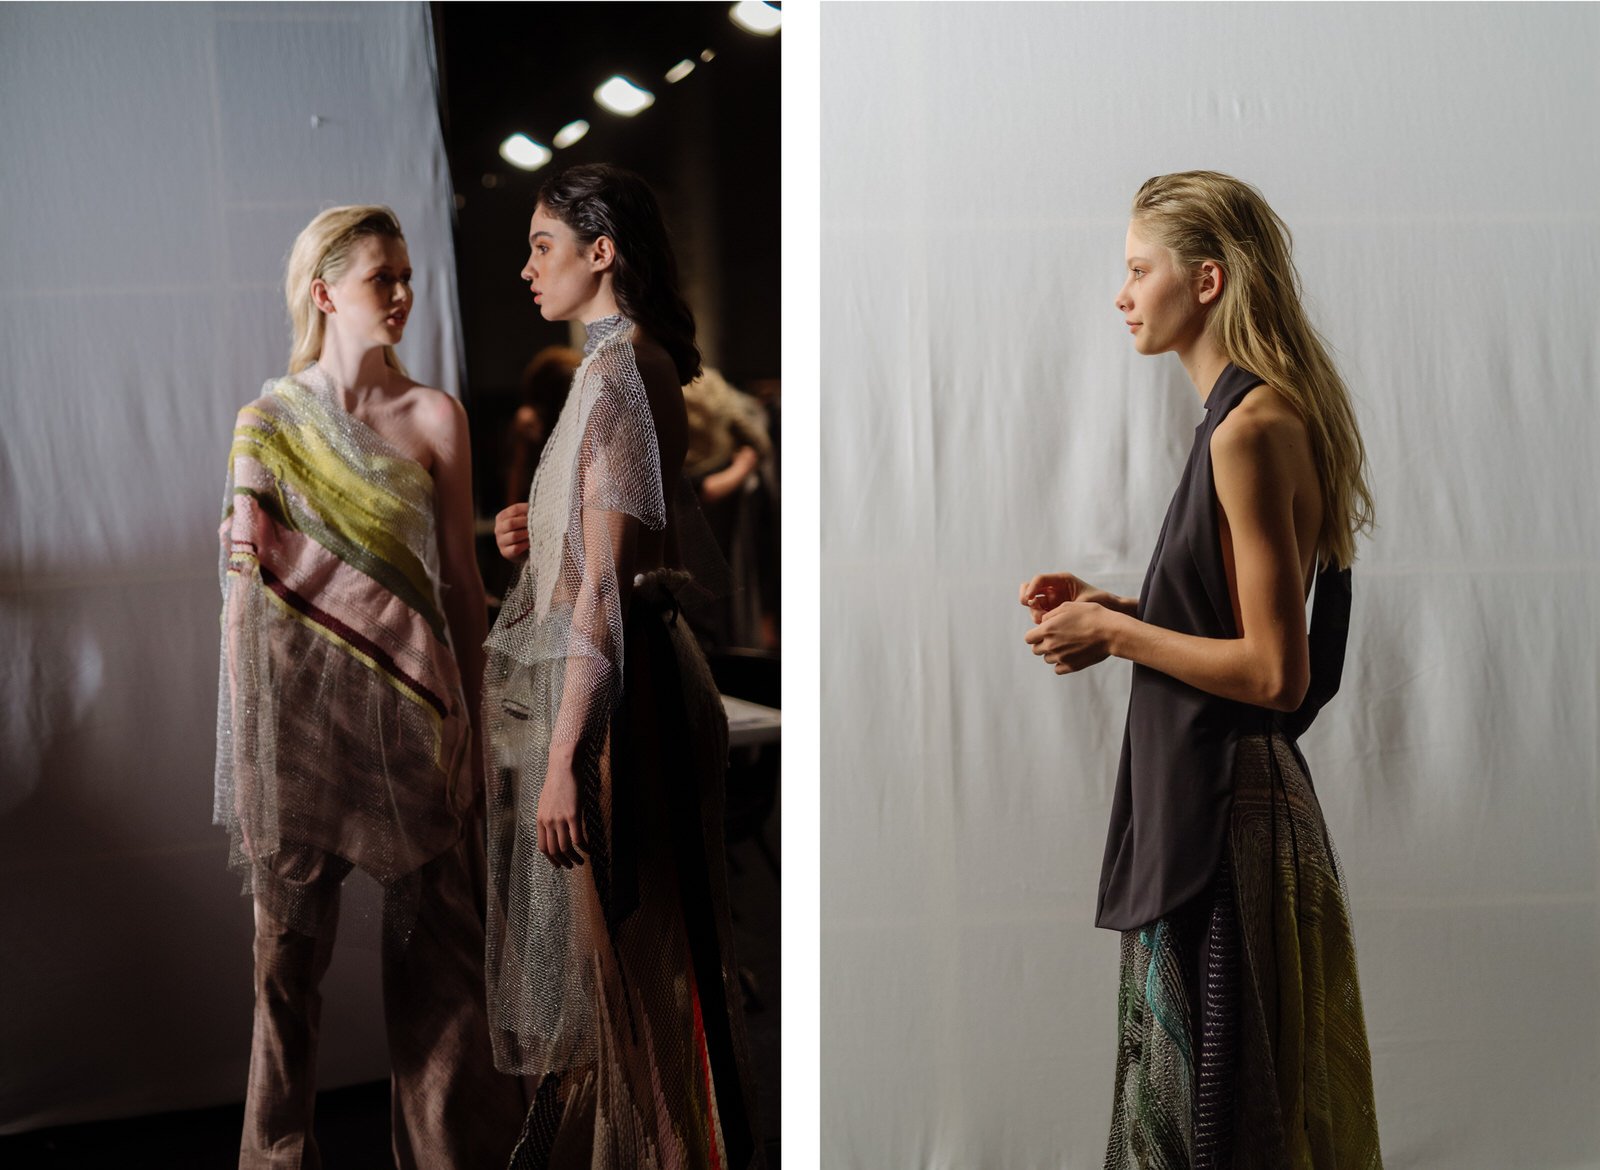 Back stage preparation for the Of Ro runway at MBFWA